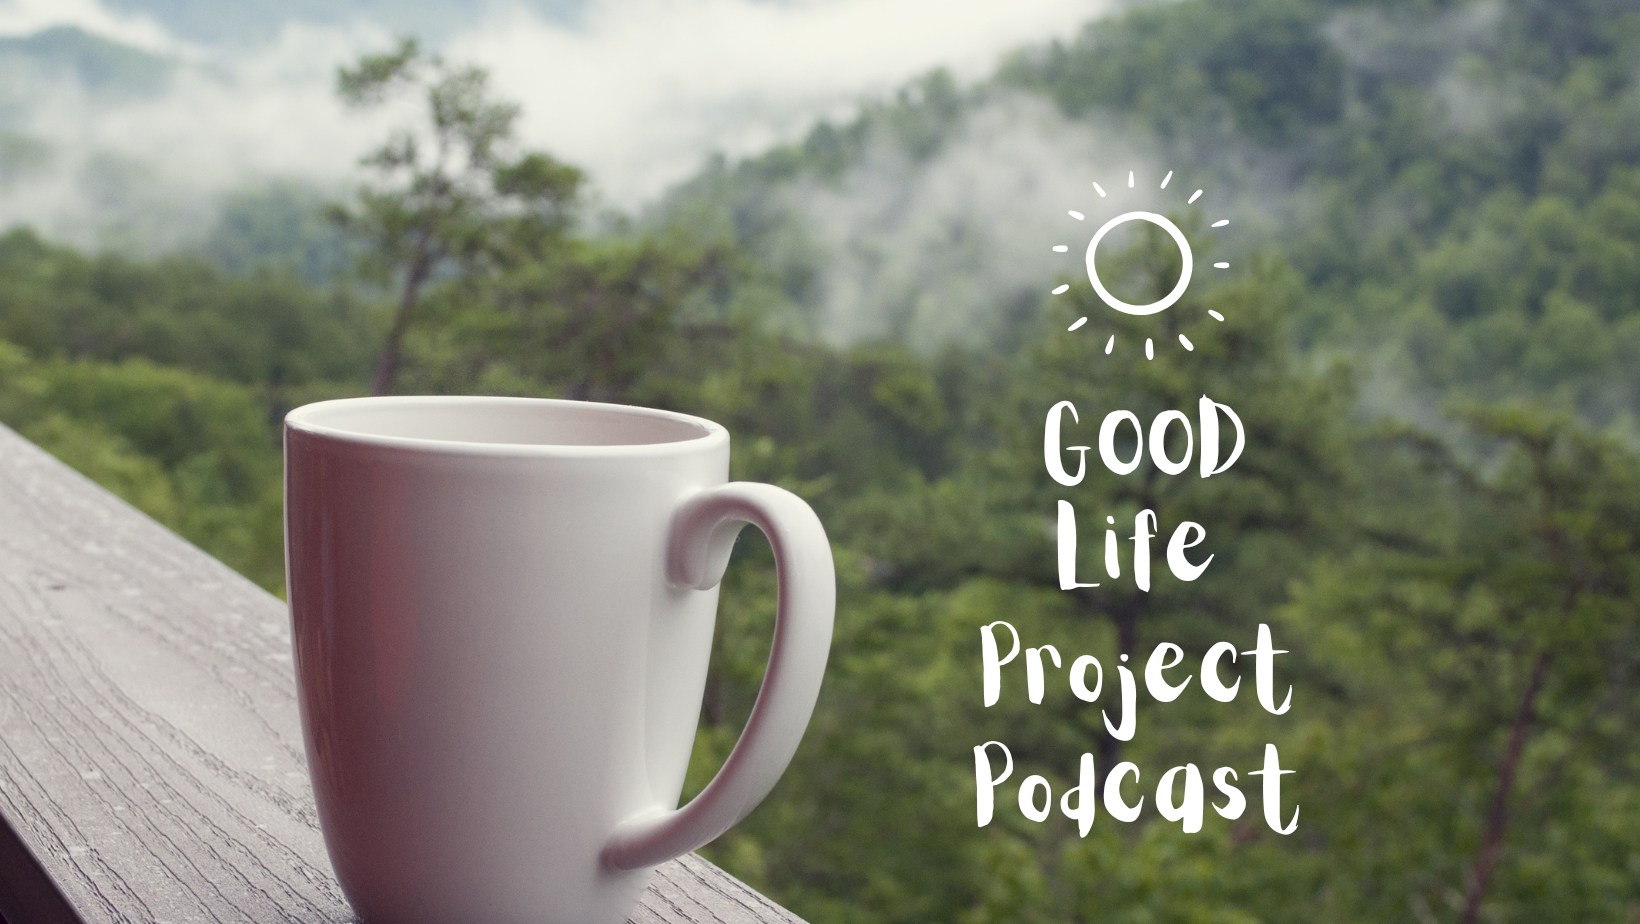 Good Life Project Podcast – Listen Here